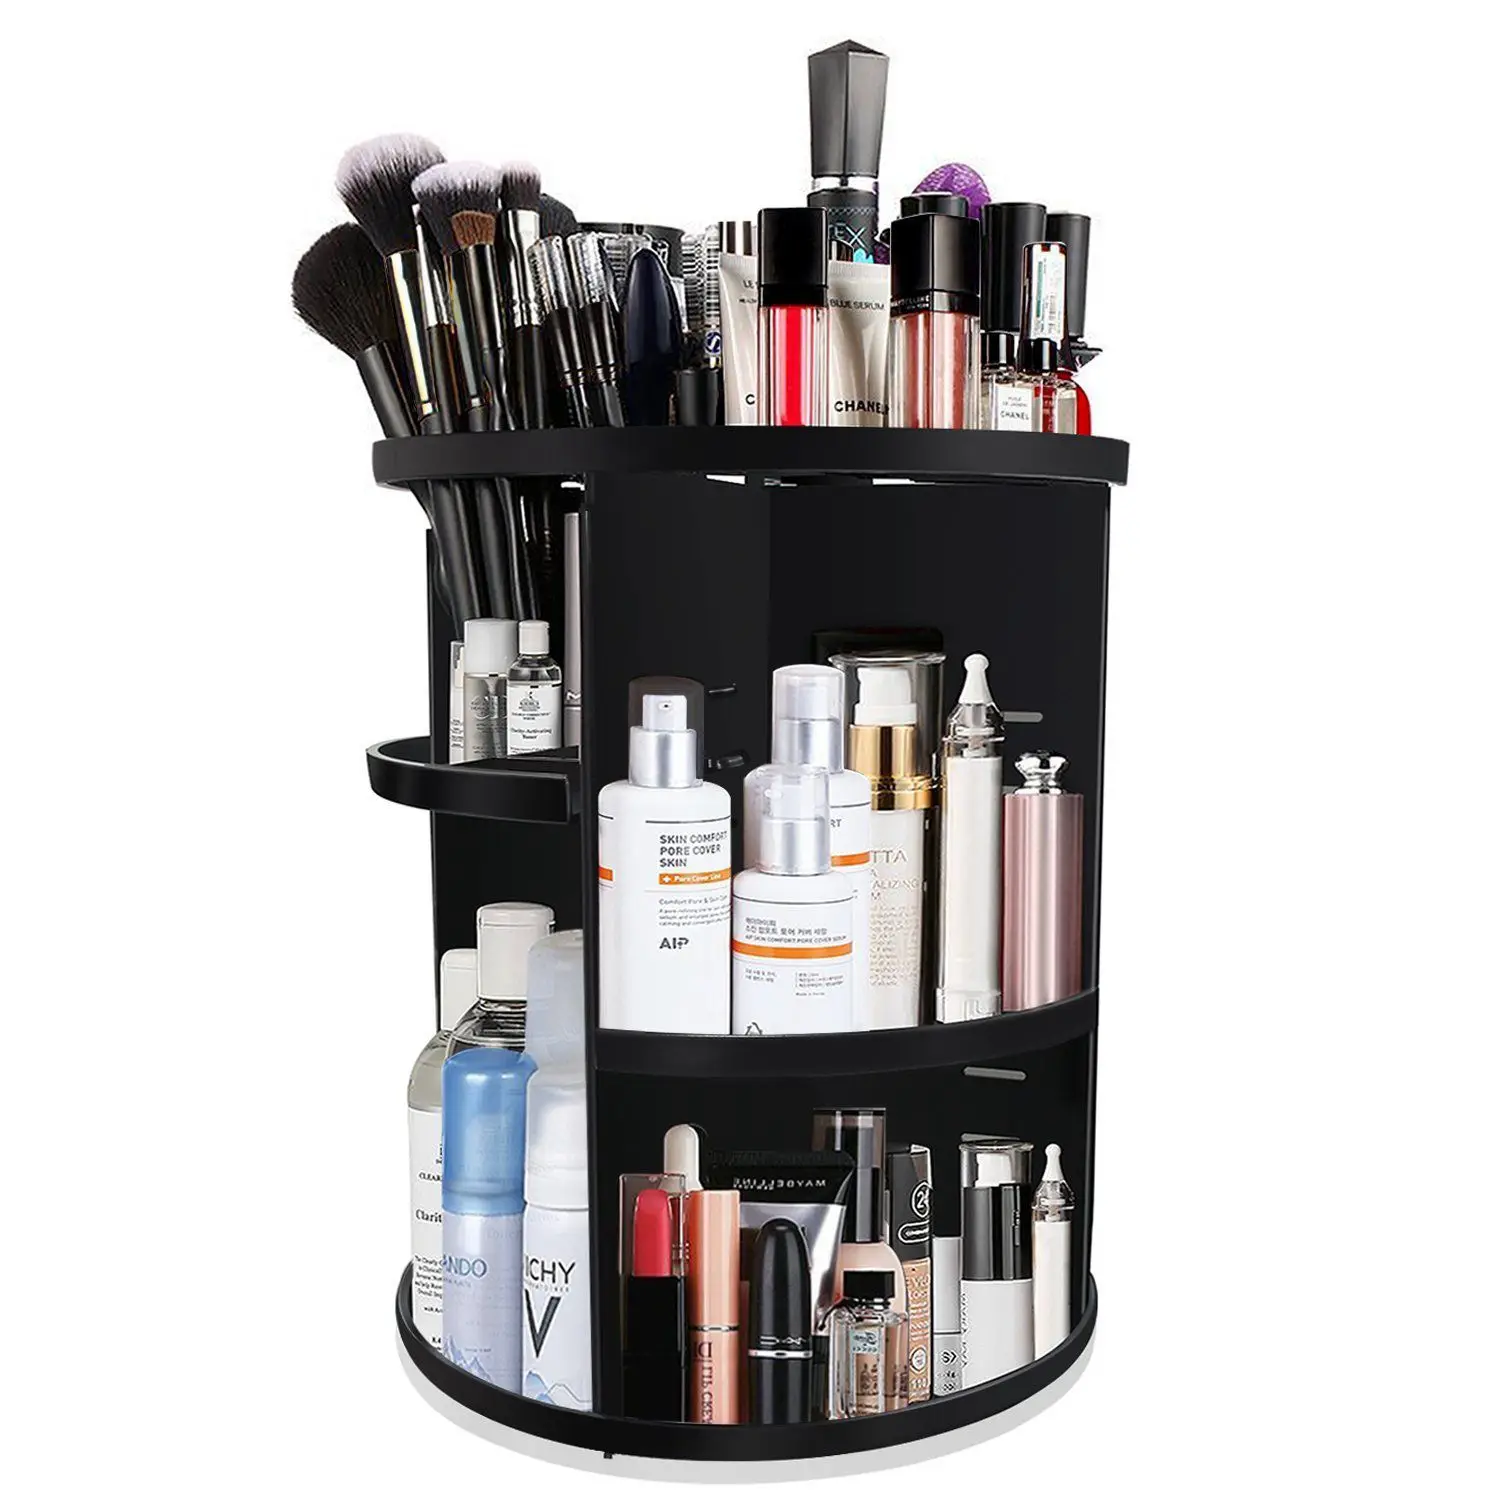 NEW 360 Degree Rotating MakeUp Organizers and Storage Box Gift For Women Adjustable Multi-Function Cosmetic Case Brush Holder